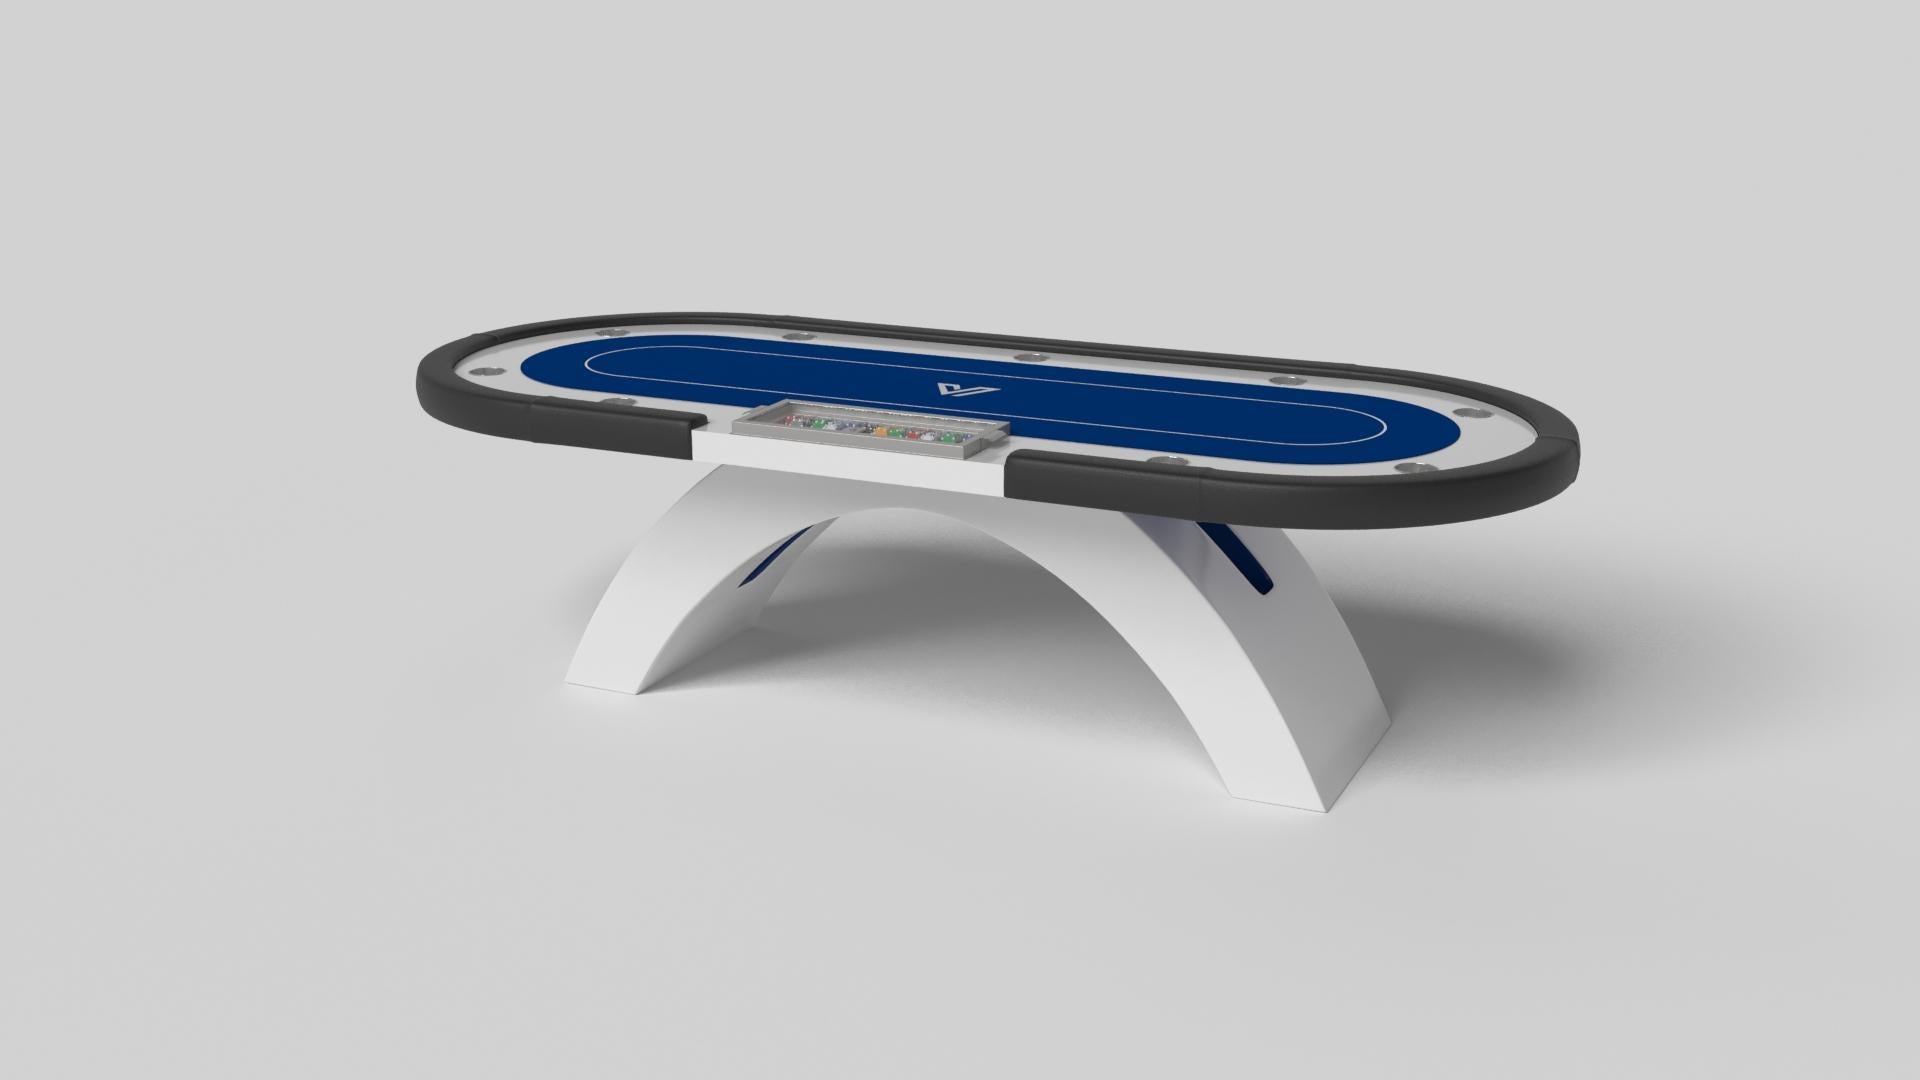 An open, arched base balances beautifully against the rounded edges of the oval surface top, making the Zenith poker table in black with red a striking combination of modern, geometric forms. Minimalist in its appeal yet luxurious in design, this